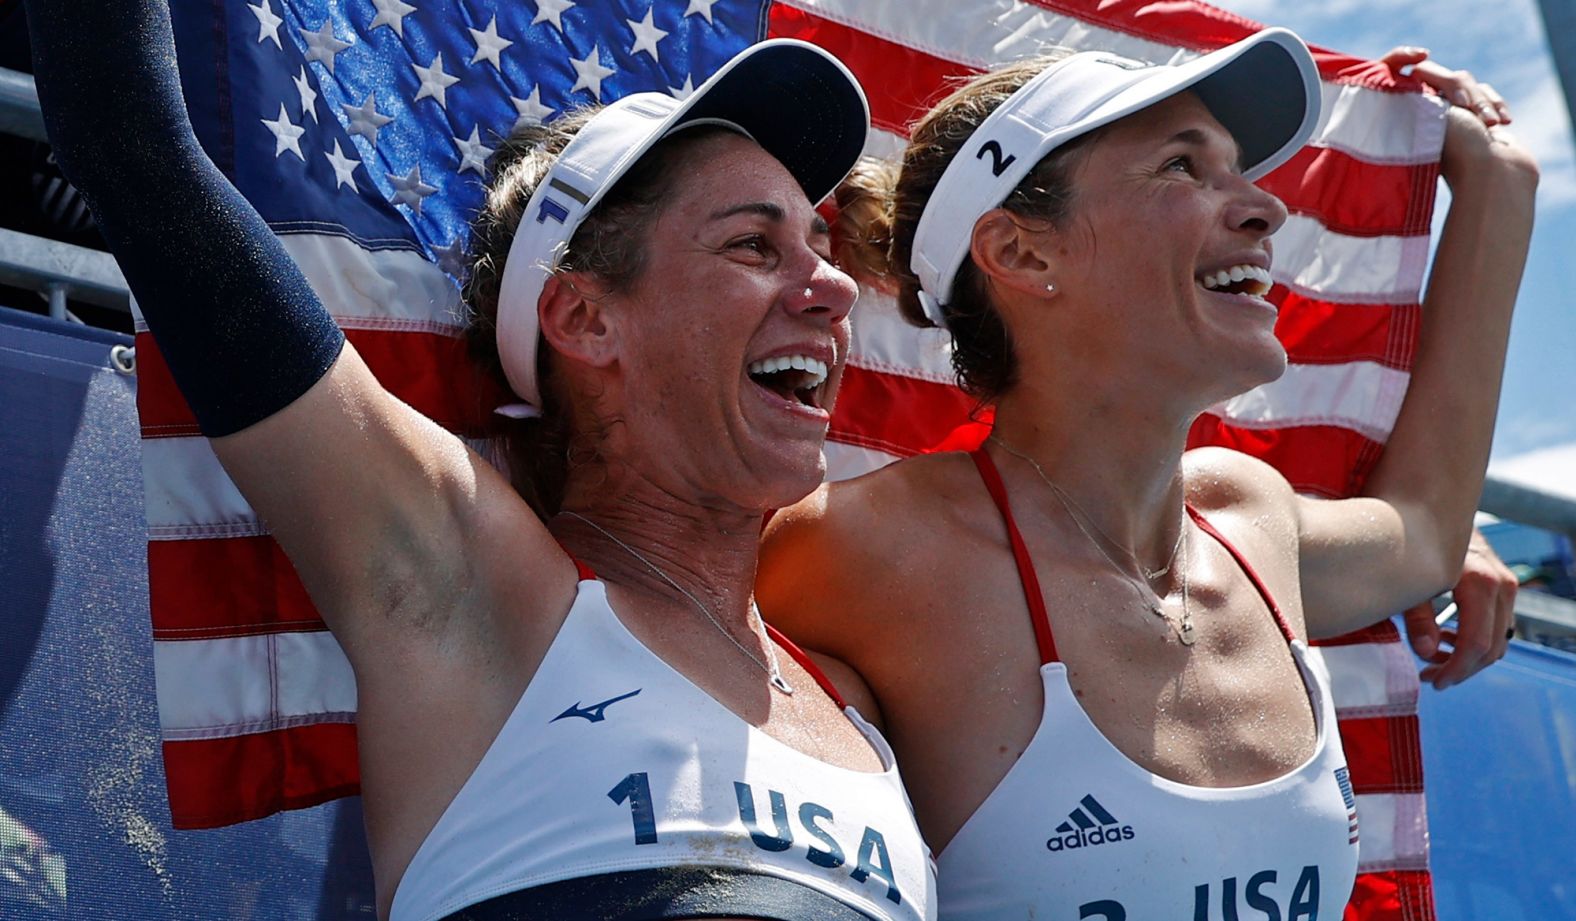 From left, American beach volleyball players April Ross and Alix Klineman celebrate after they won their <a href="index.php?page=&url=https%3A%2F%2Fwww.cnn.com%2Fworld%2Flive-news%2Ftokyo-2020-olympics-08-05-21-spt%2Fh_faefc6150a210d35f46498be8df1f679" target="_blank">gold-medal match</a> on August 6.